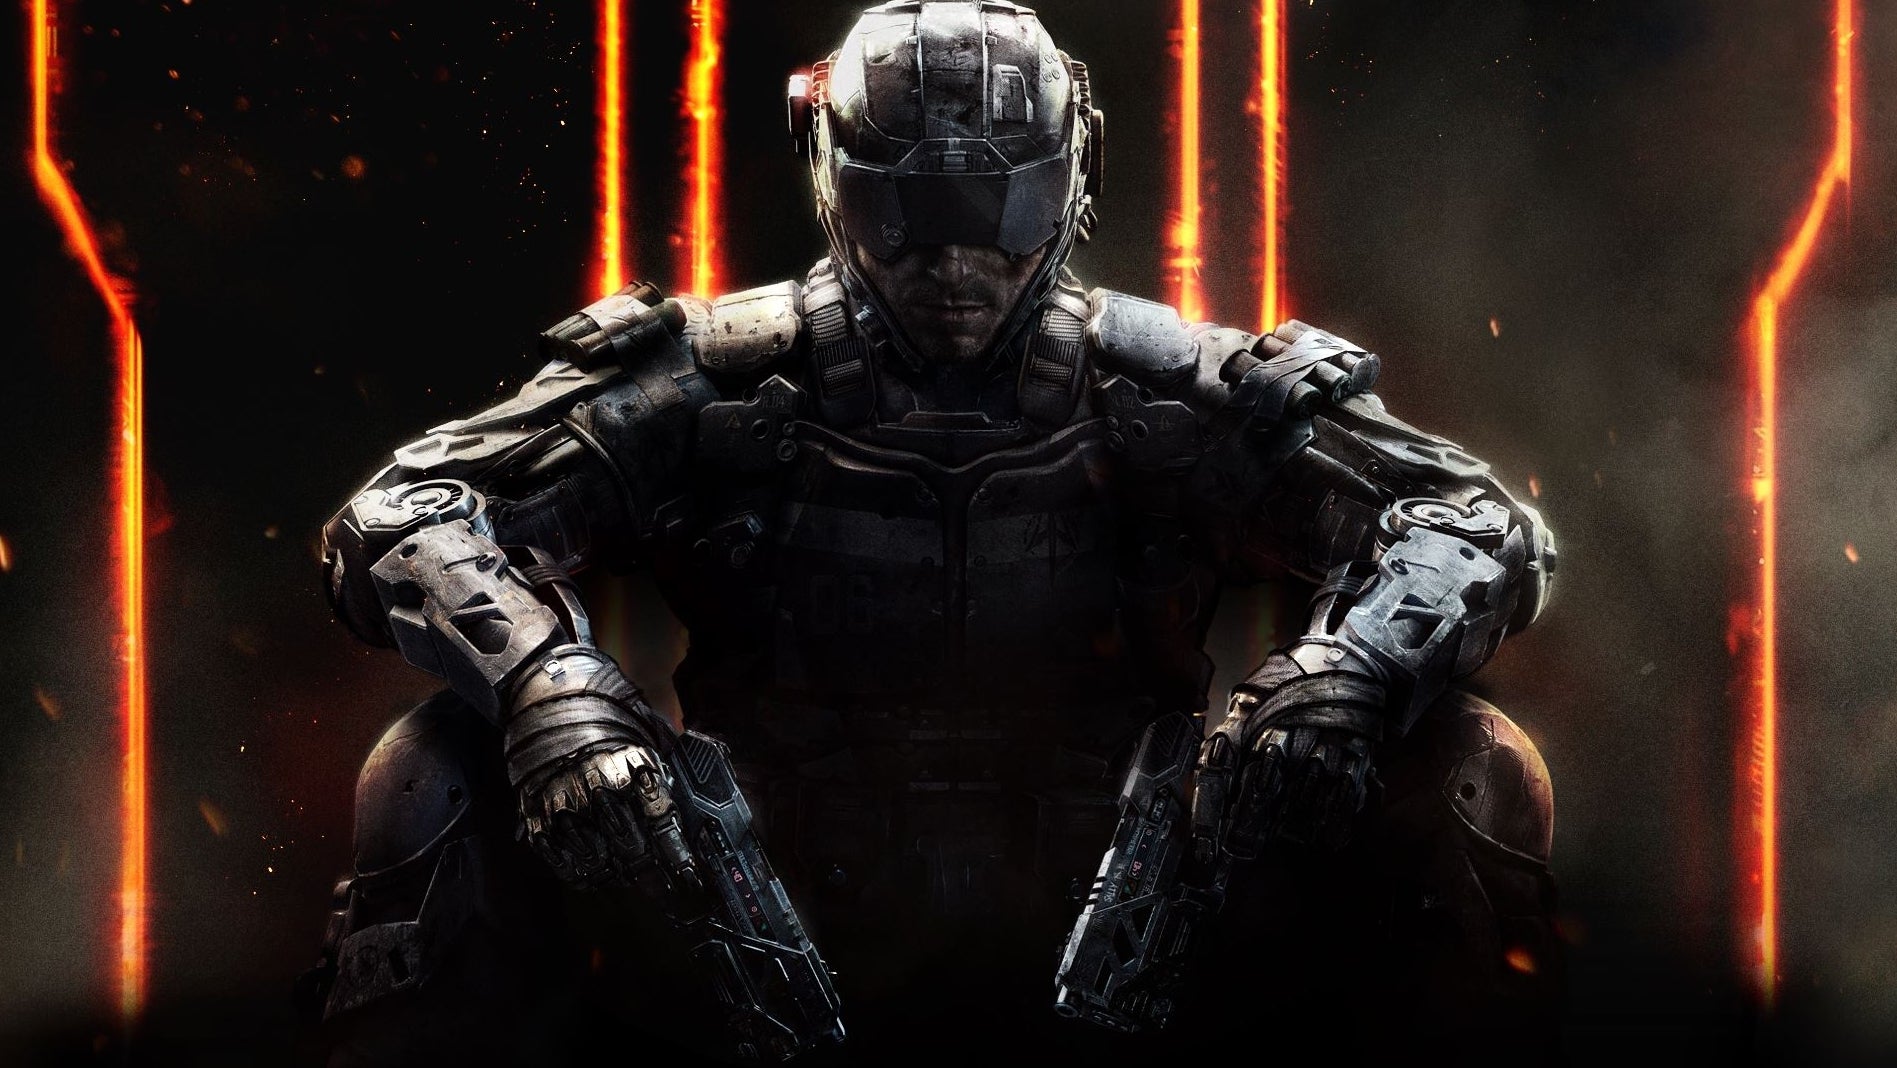 Image for Black Ops 3 available now as a surprise PS Plus giveaway